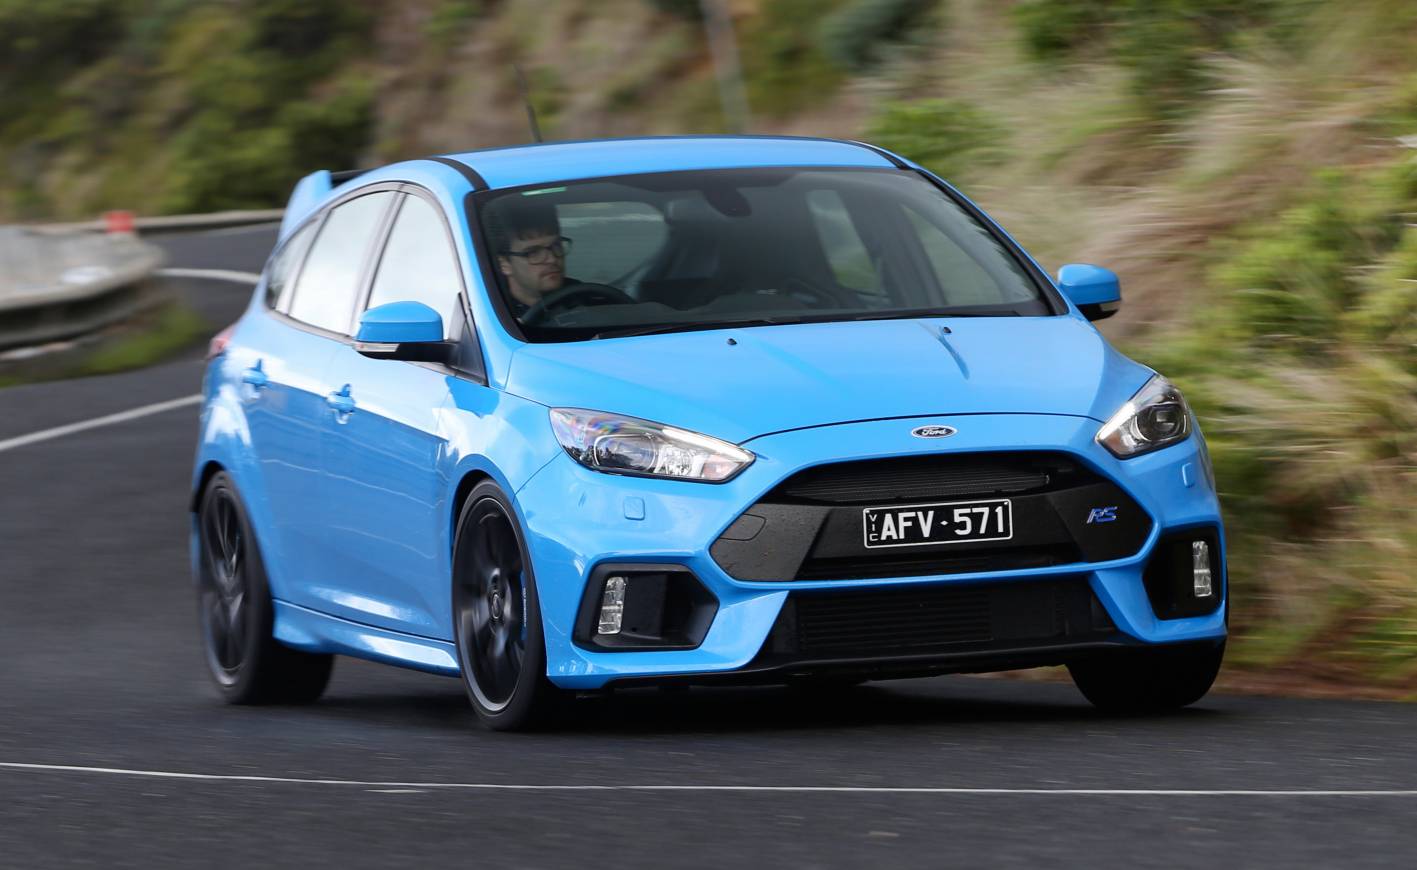 2016 Ford Focus RS now on sale in Australia from $50,990
PerformanceDrive